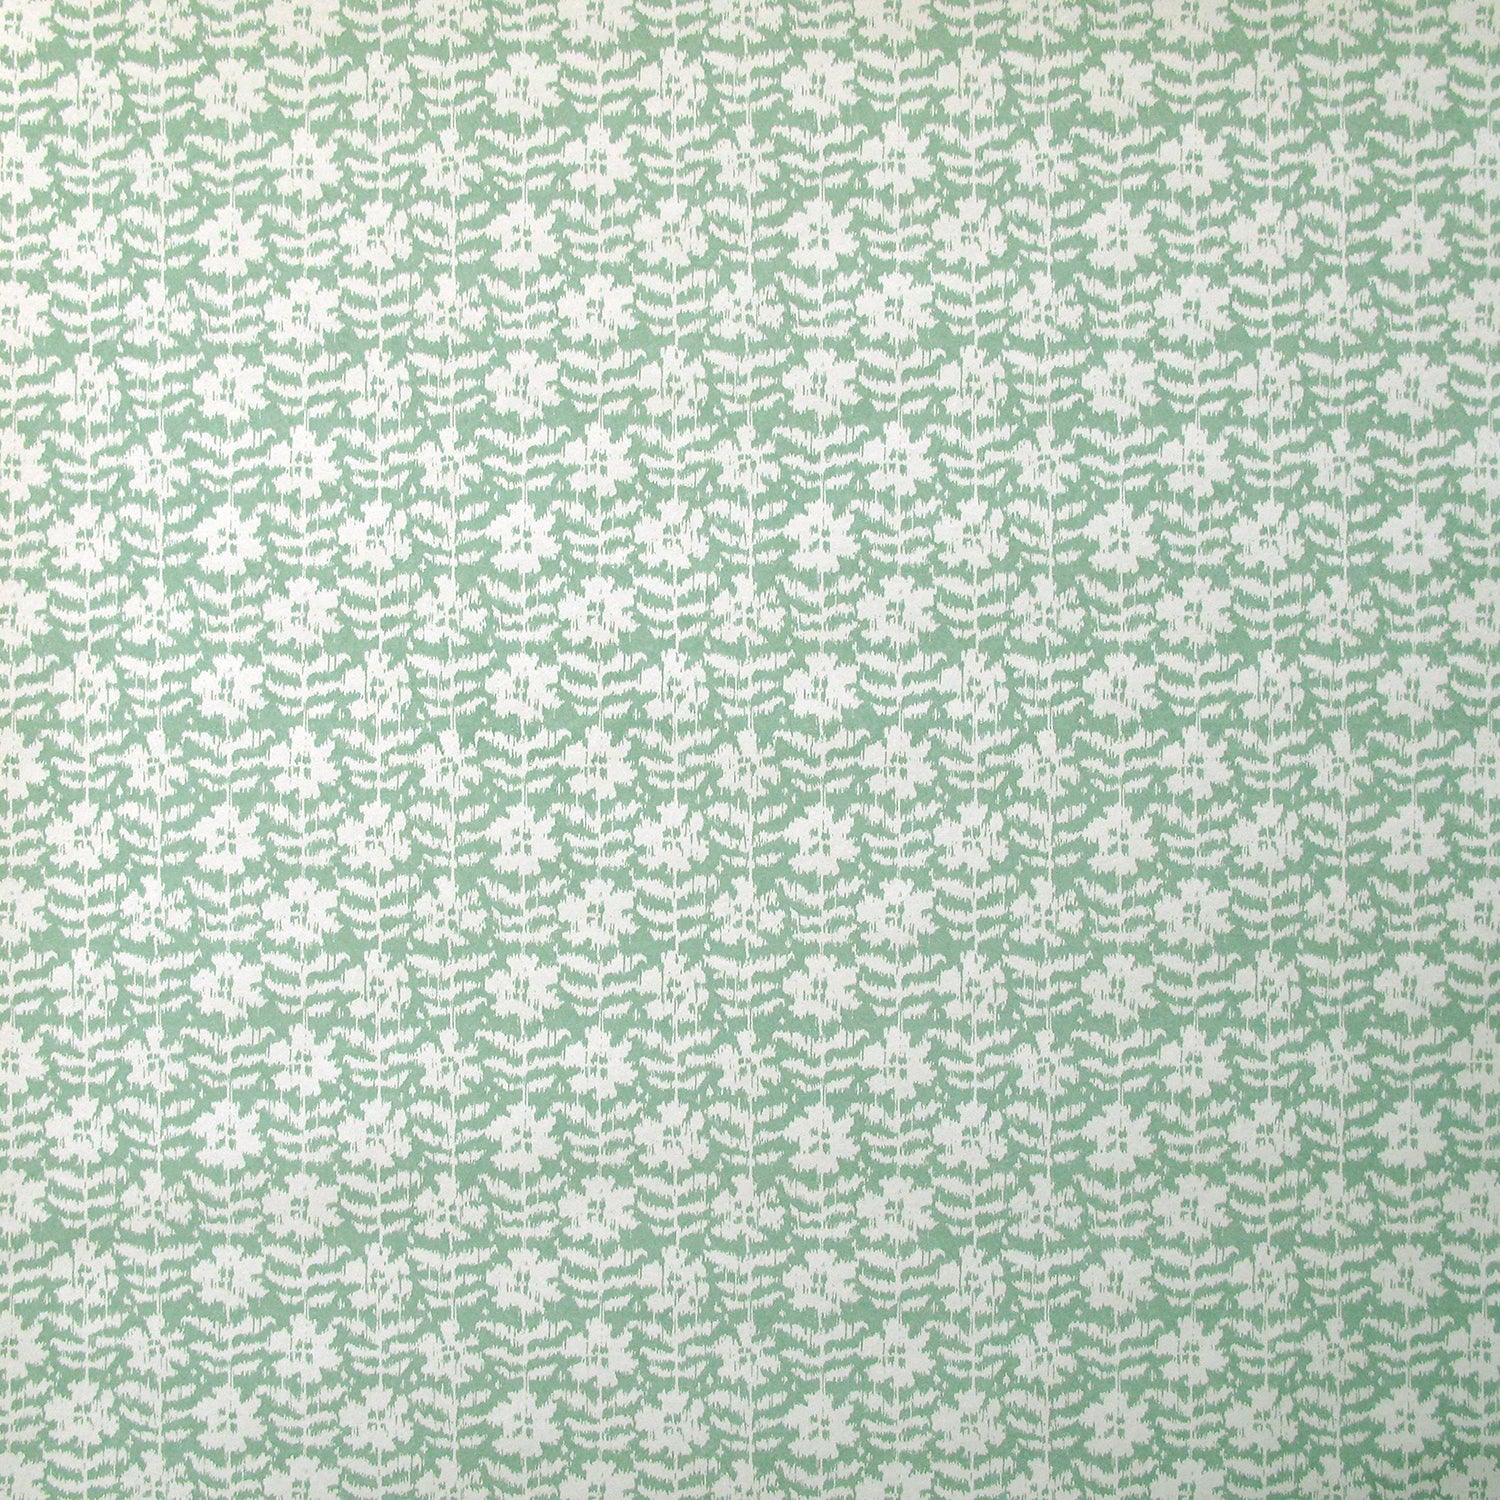 Detail of wallpaper in a floral grid print in white on a blue-green field.